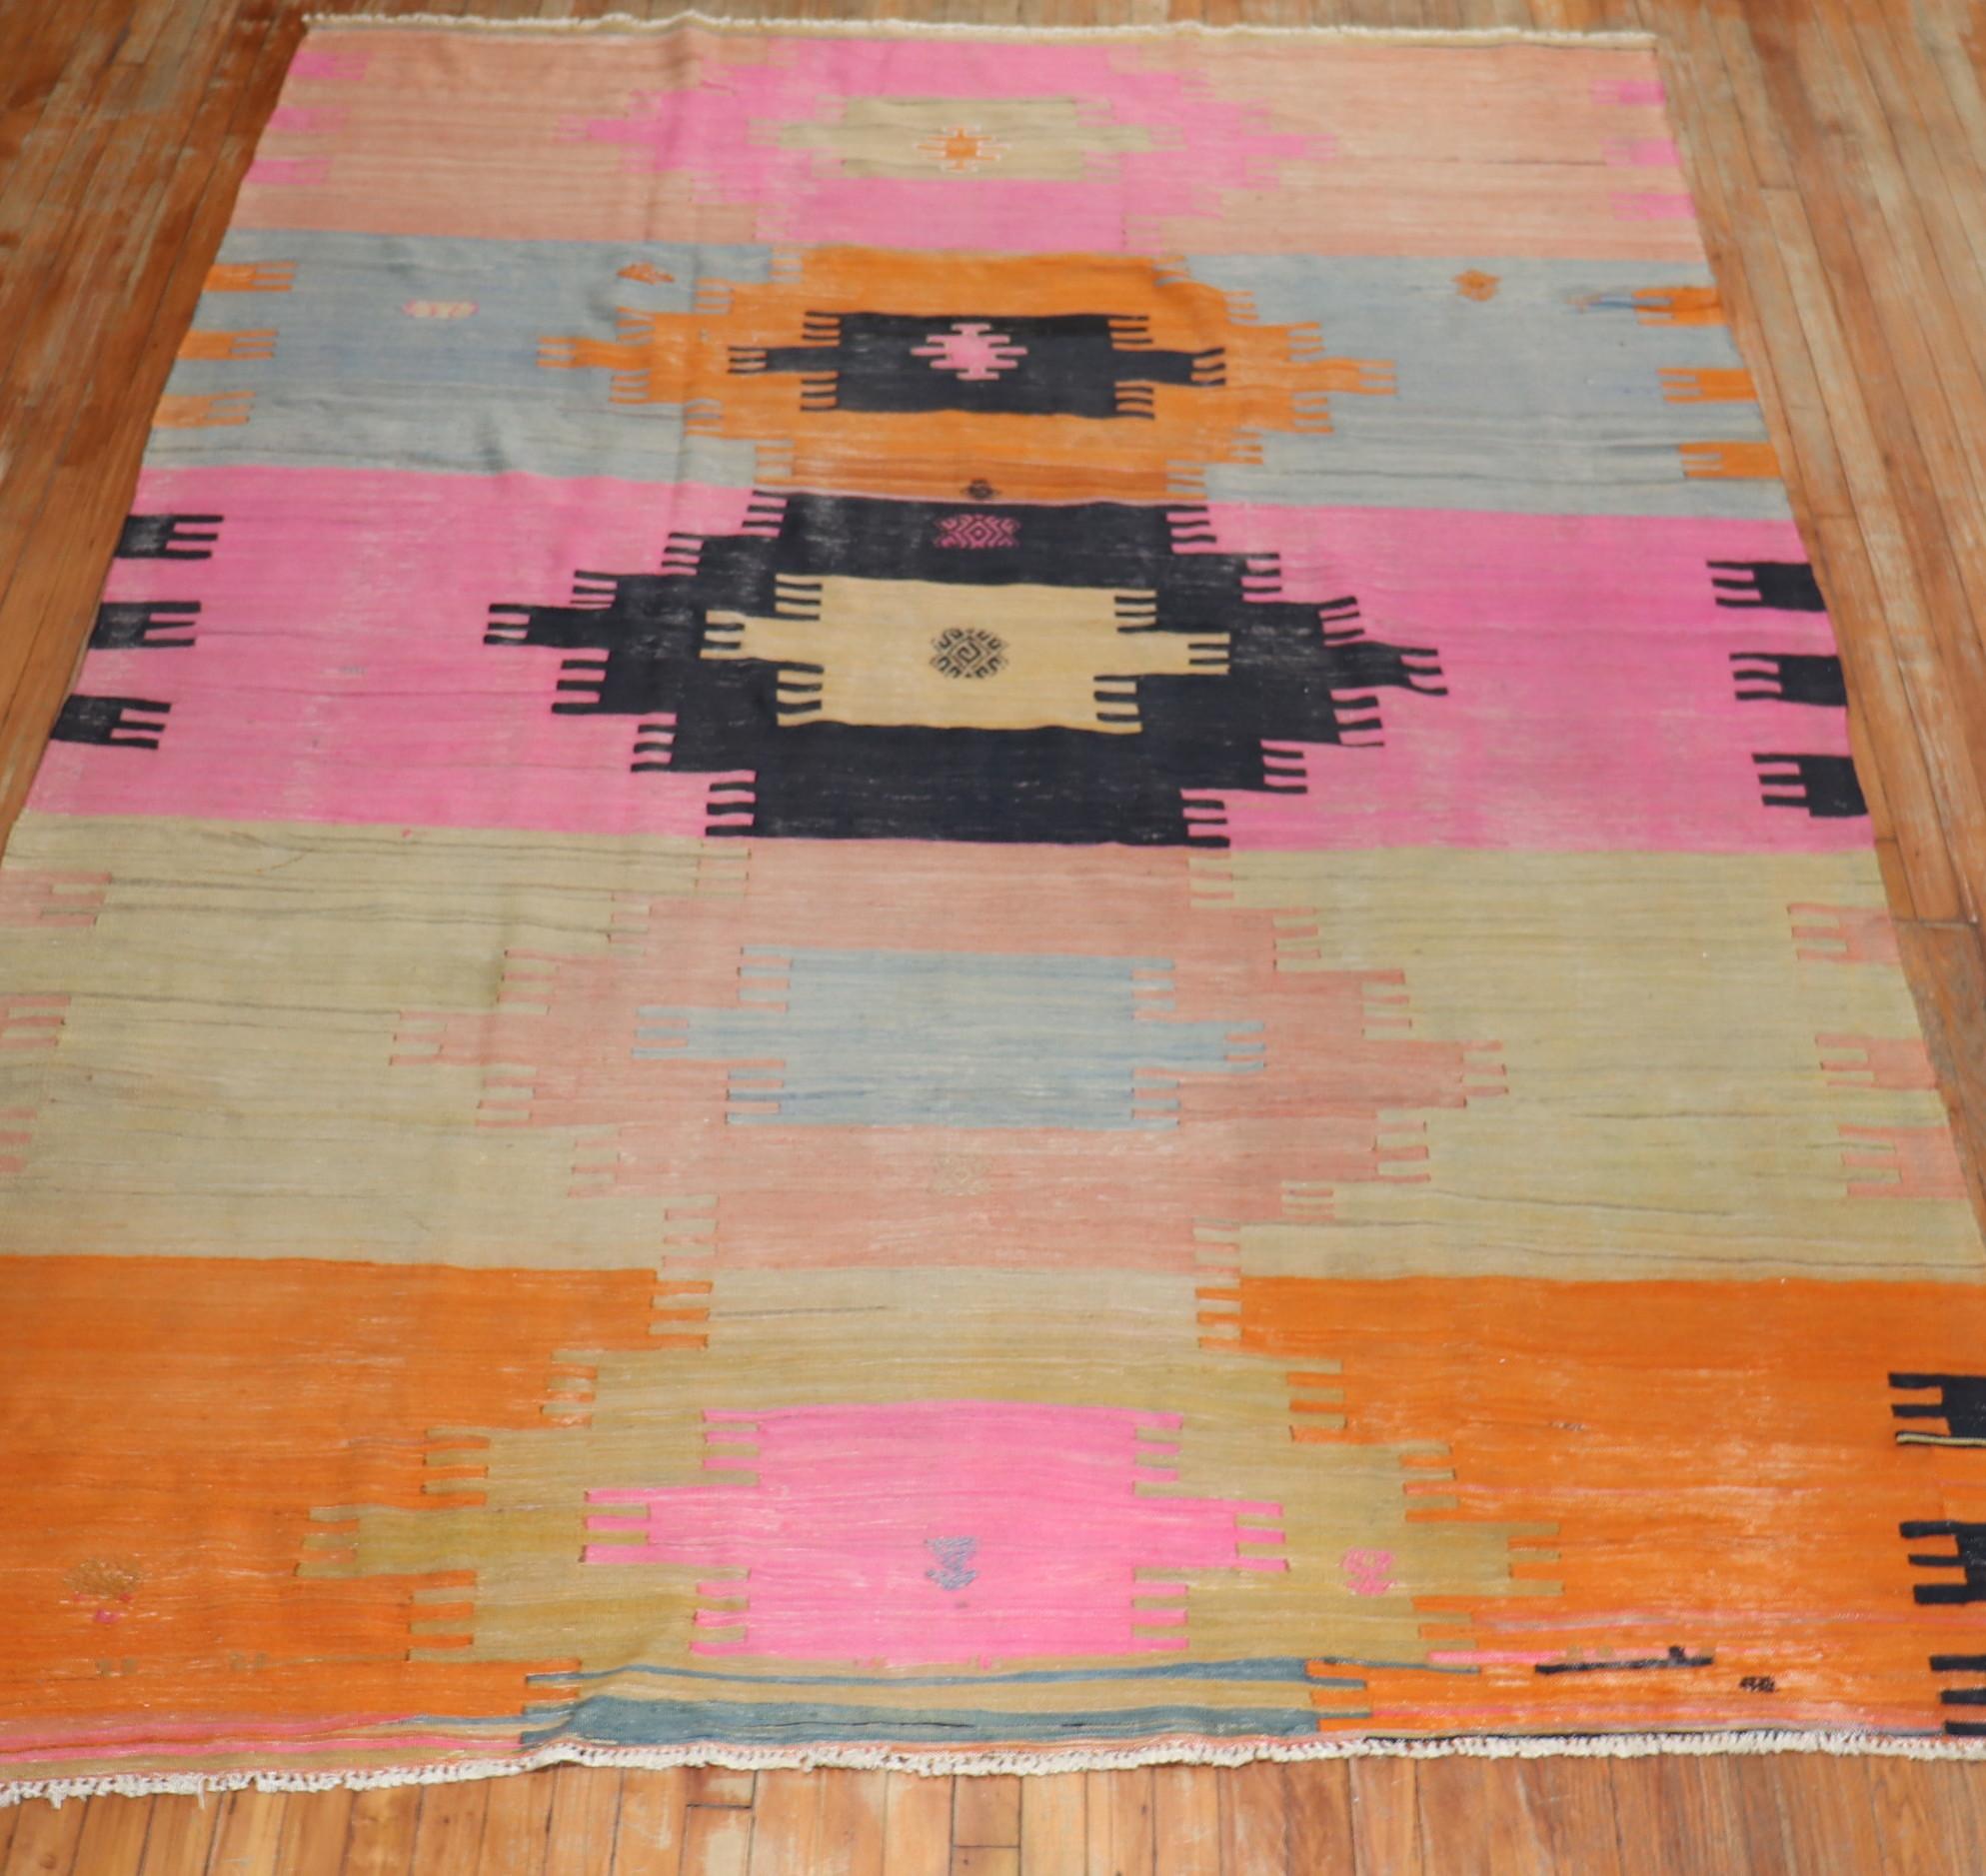 A room size Turkish Kilim from the mid-20th century highlighted in bright pink & orange shades

Measures: 7' x 10'2